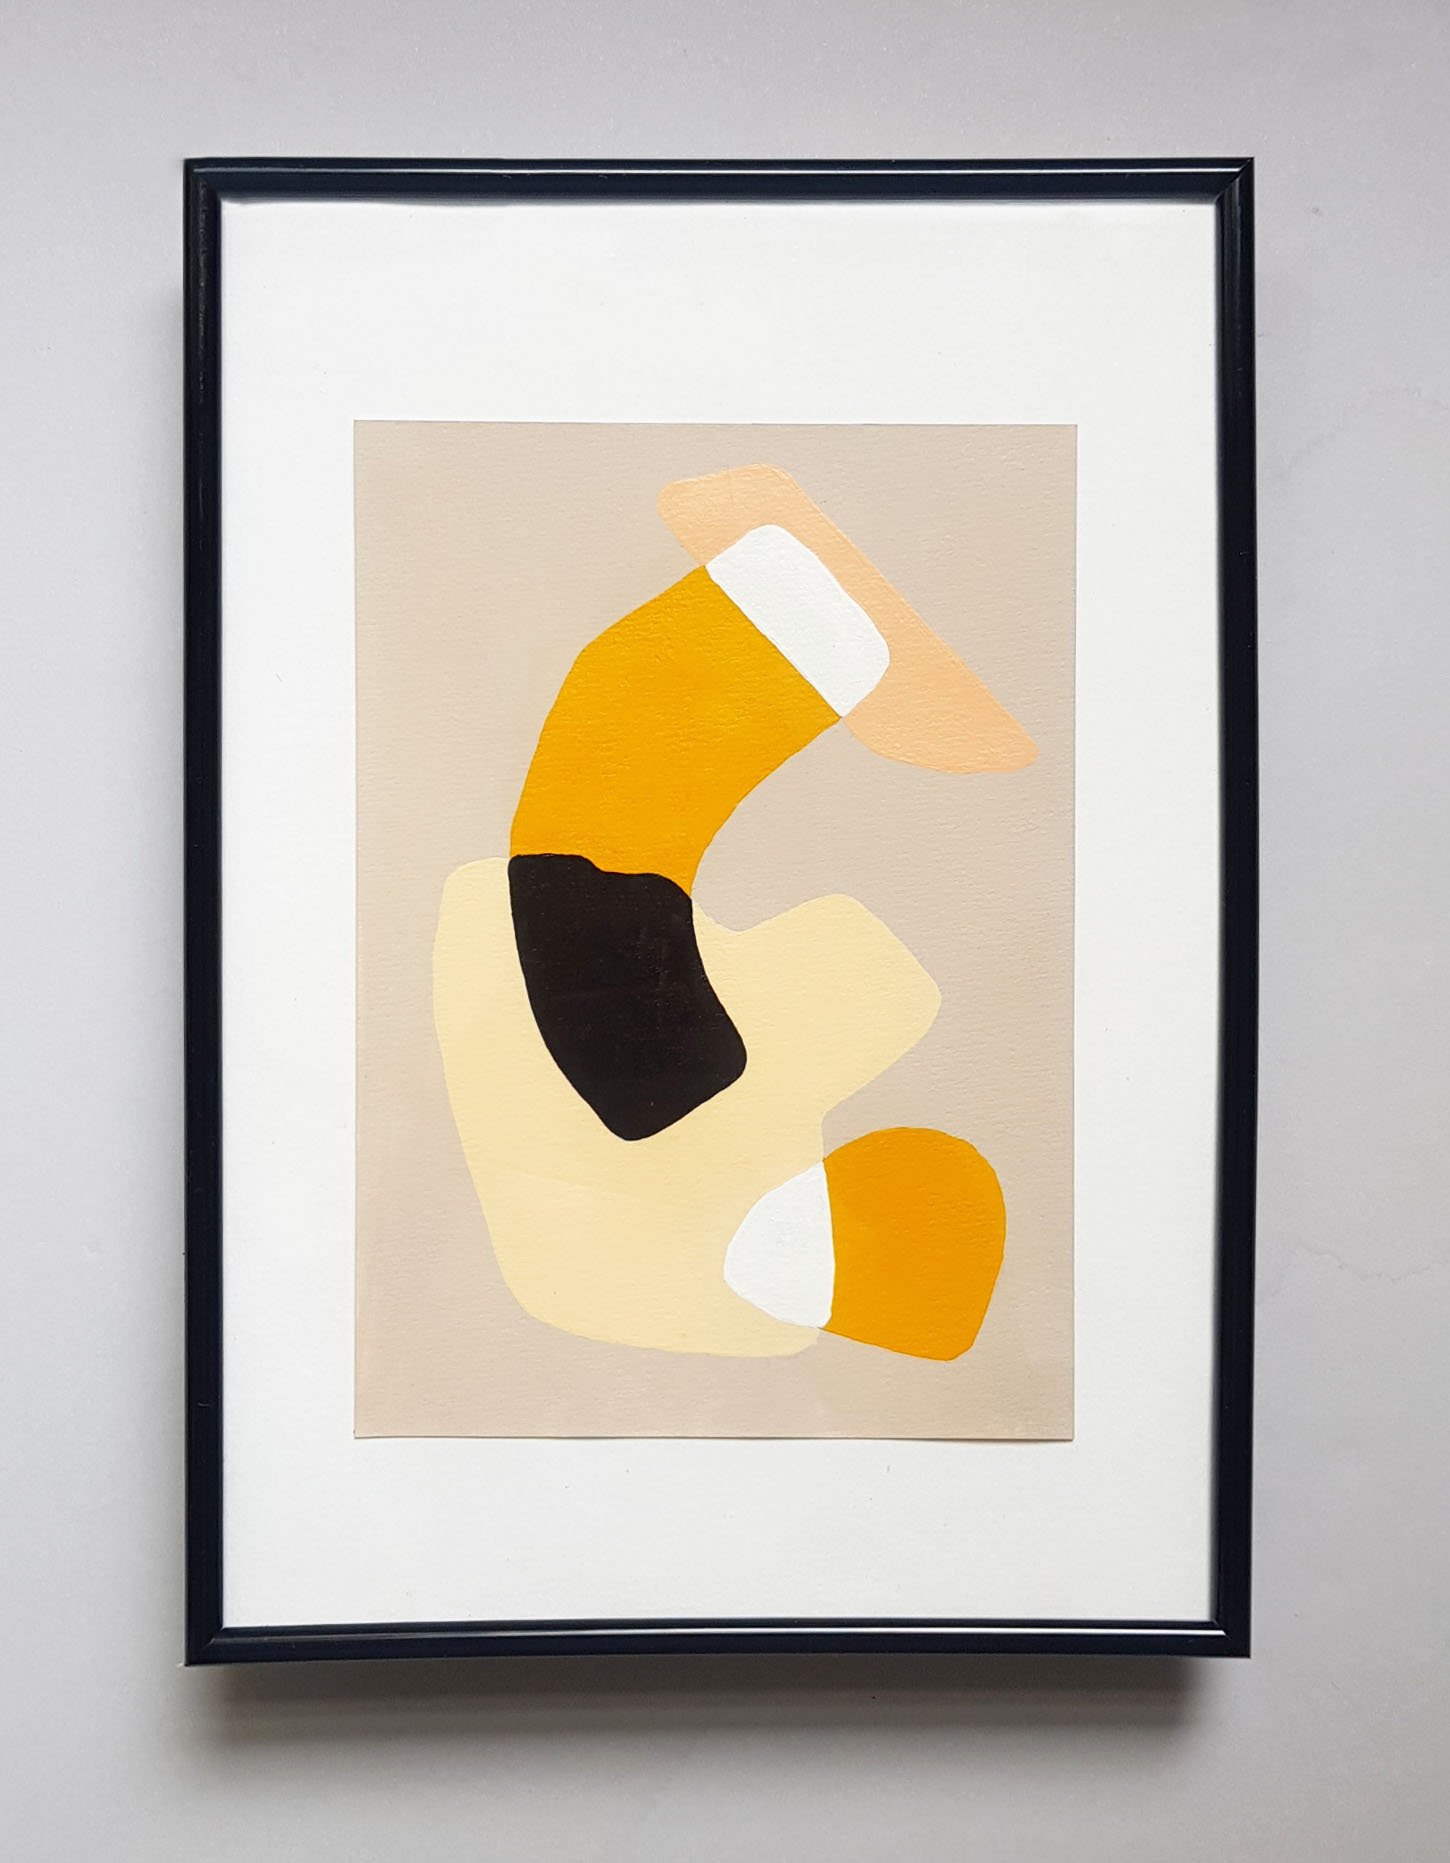 The Intersect - Mustard and Black Mini 2, A5 size, Acrylic on Paper, $70 Unframed.jpg